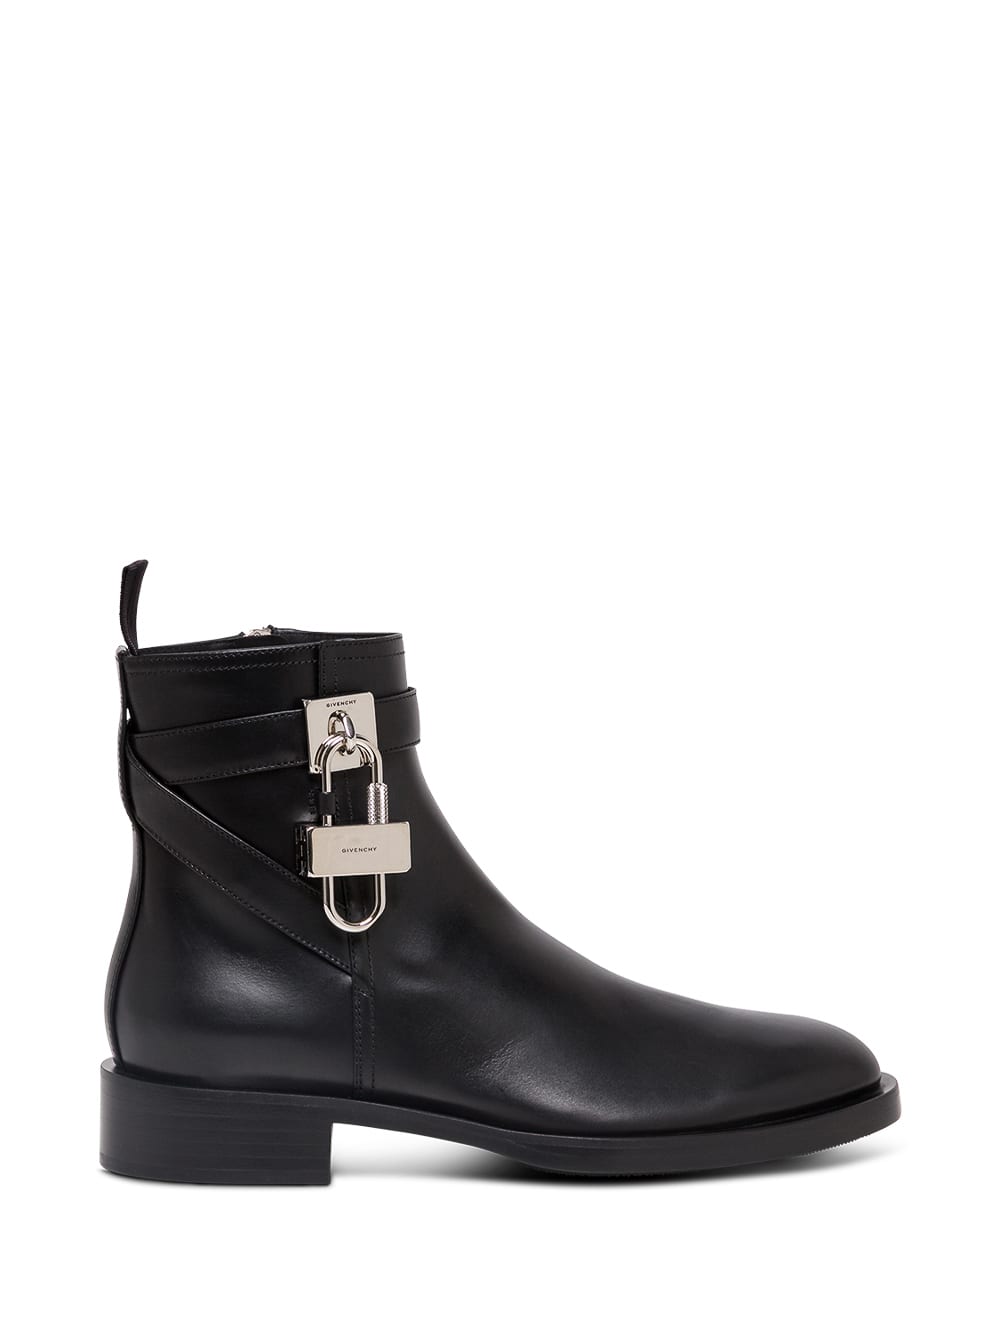 Givenchy Lock Black Leather Ankle Boots